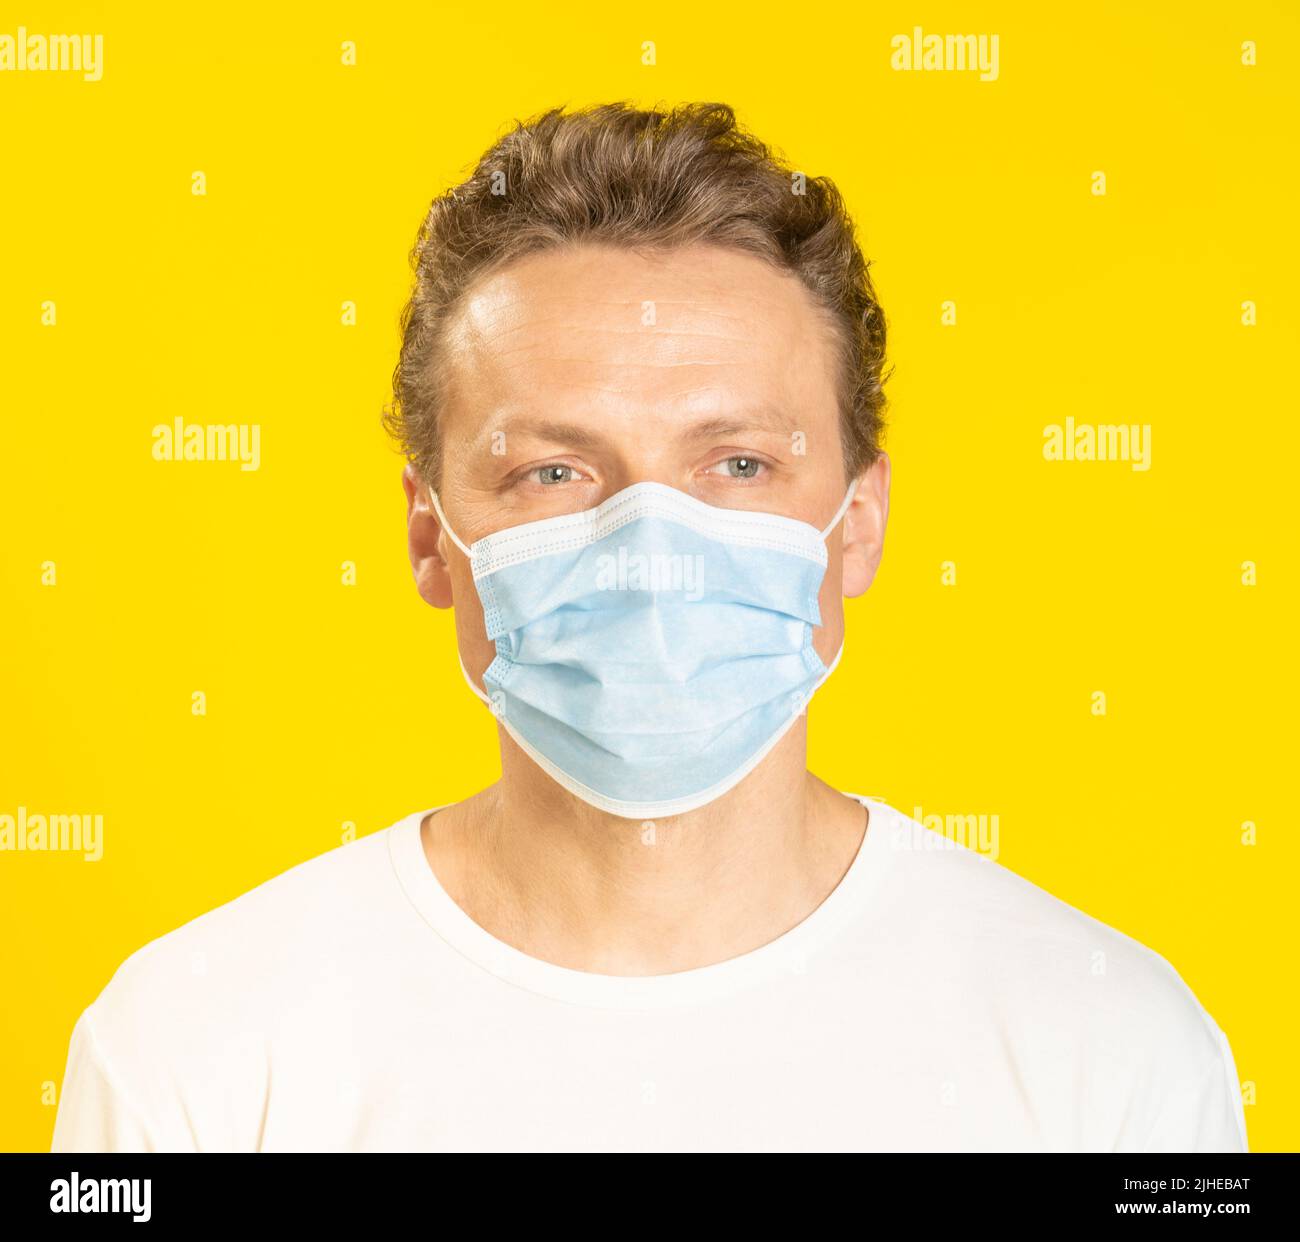 Sad face young man wearing a medical mask on his face. Sick young man in face mask wearing white t-shirt isolated on yellow background. A sick caucasian man in protective face mask.  Stock Photo